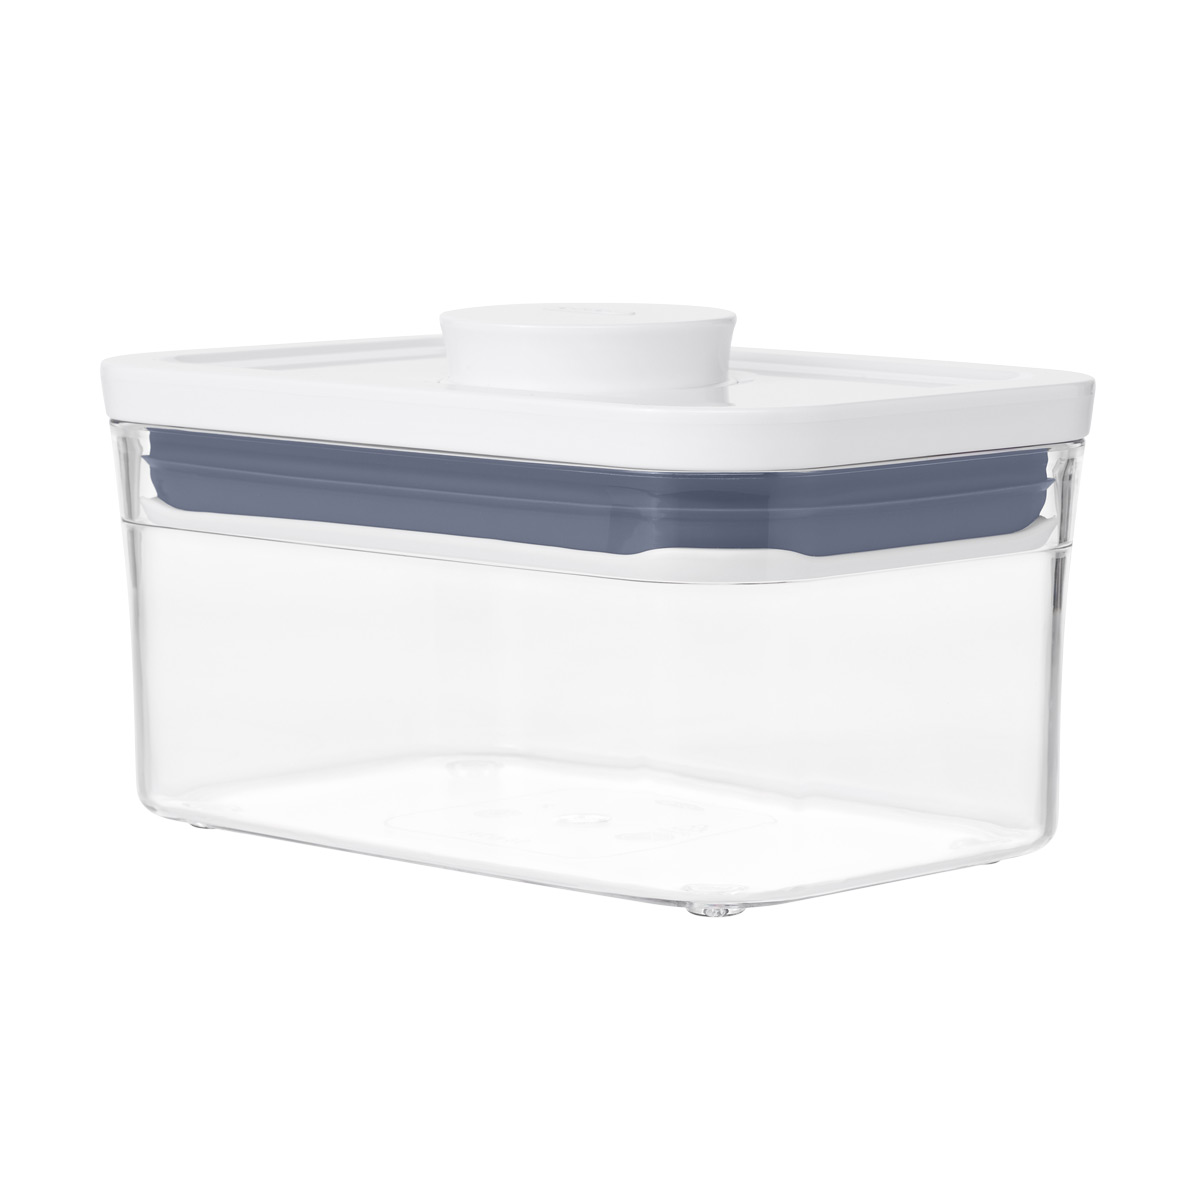 https://www.containerstore.com/catalogimages/369041/10075137-OXO-0.6-qt-POP-Container-Re.jpg